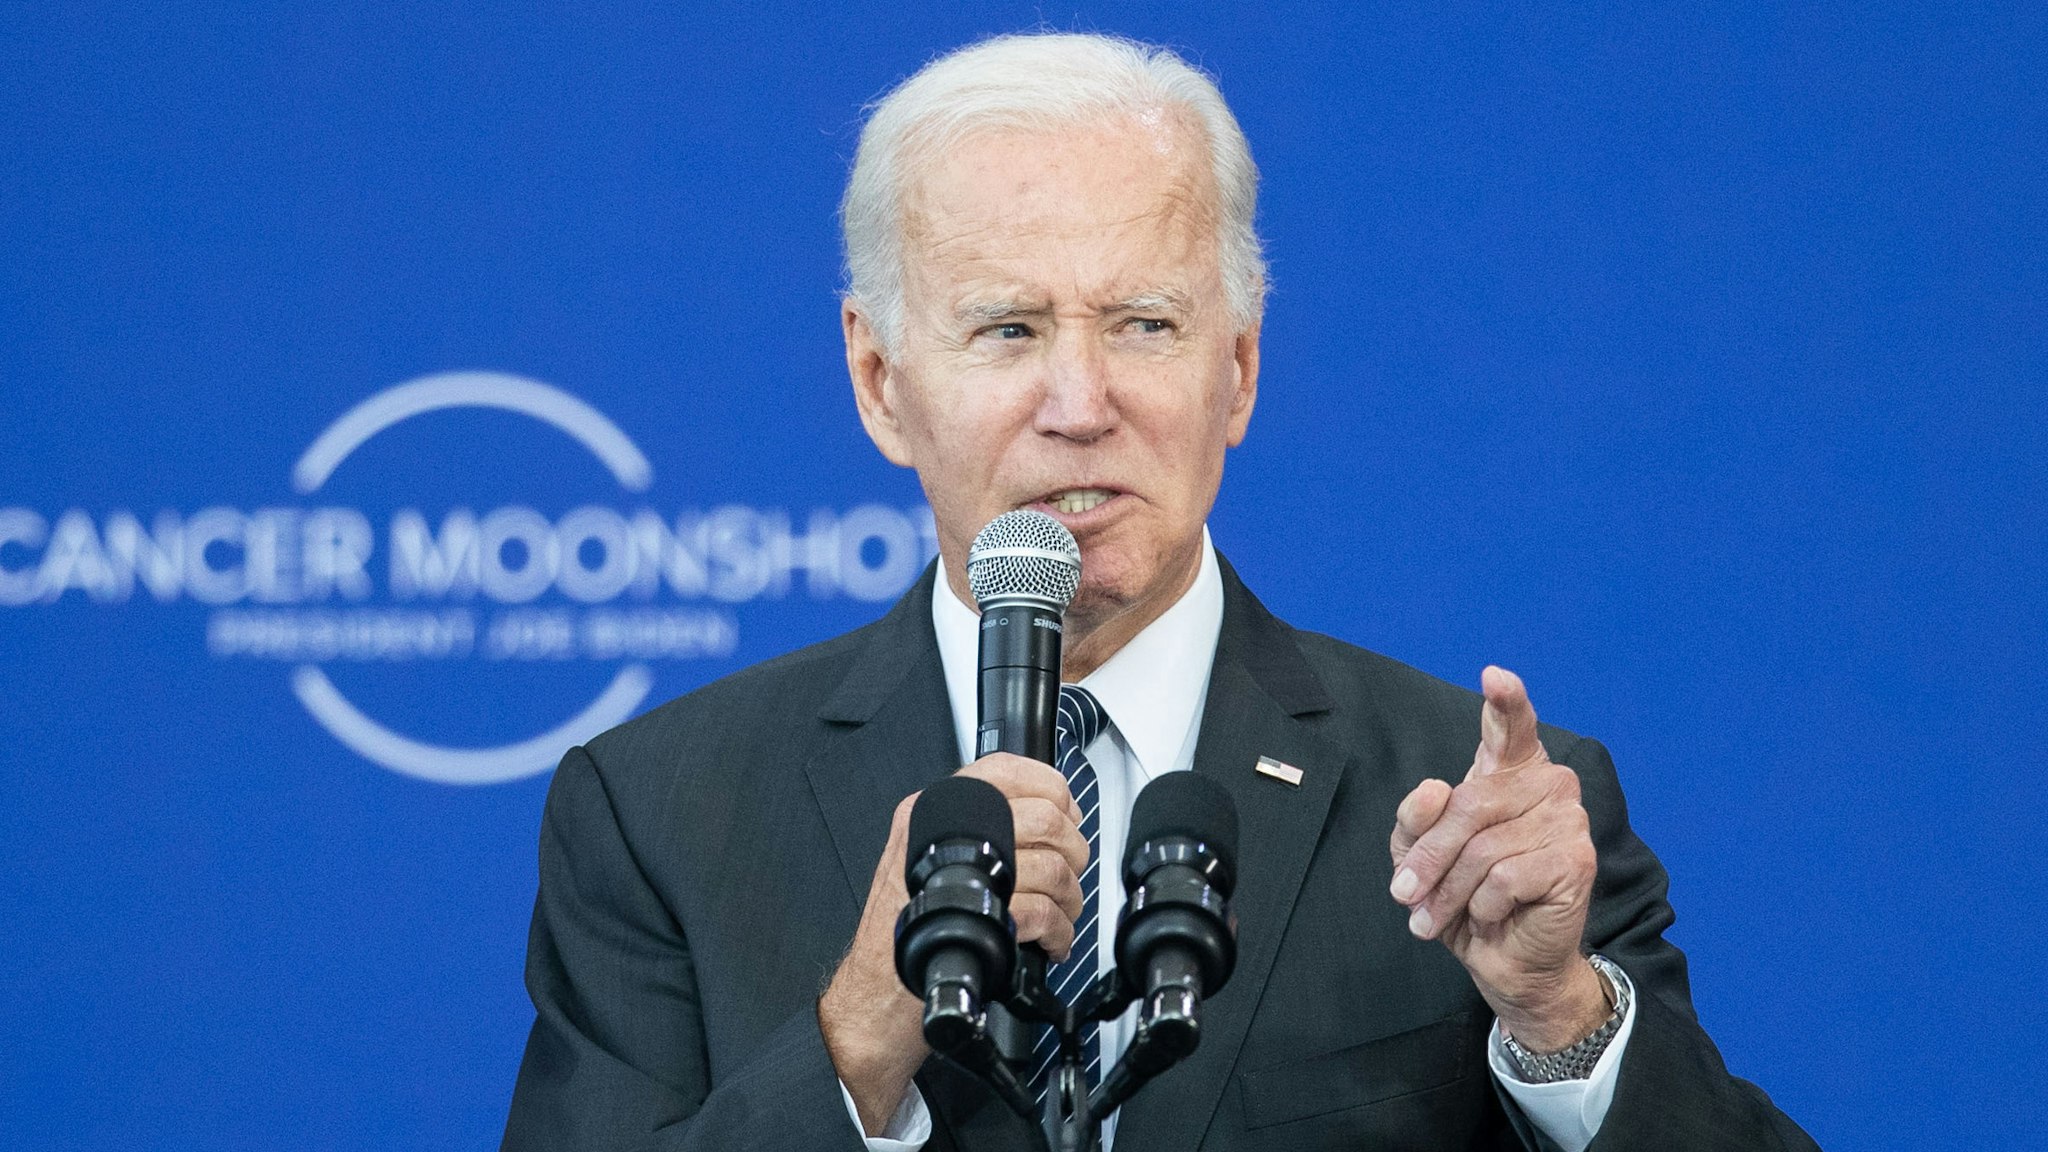 BOSTON, MA - SEPTEMBER 12: U.S. President Joe Biden delivers remarks at the John F. Kennedy Library and Museum on his Cancer Moonshot Initiative on September 12, 2022 in Boston, Massachusetts. The measure aims to cut the cancer death rate in half over the next 25 years and provide greater support to caregivers and survivors.